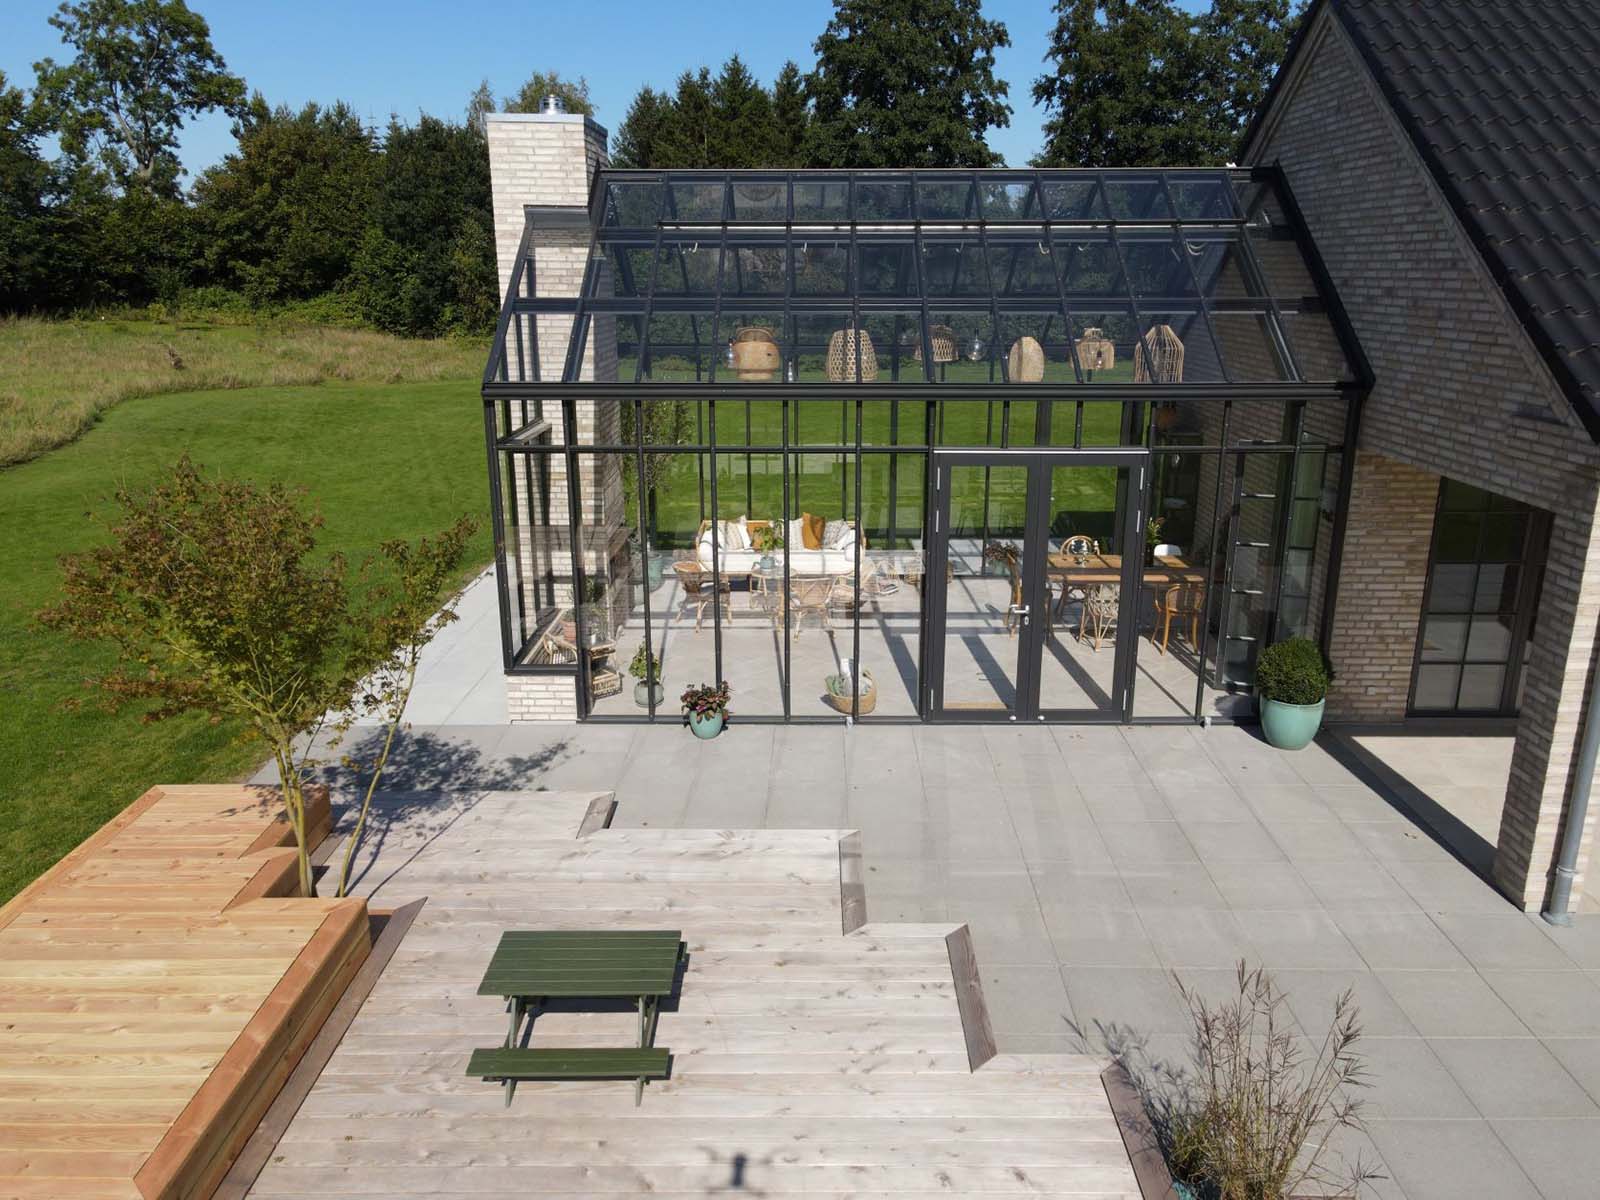 Orangery as an extension of living room